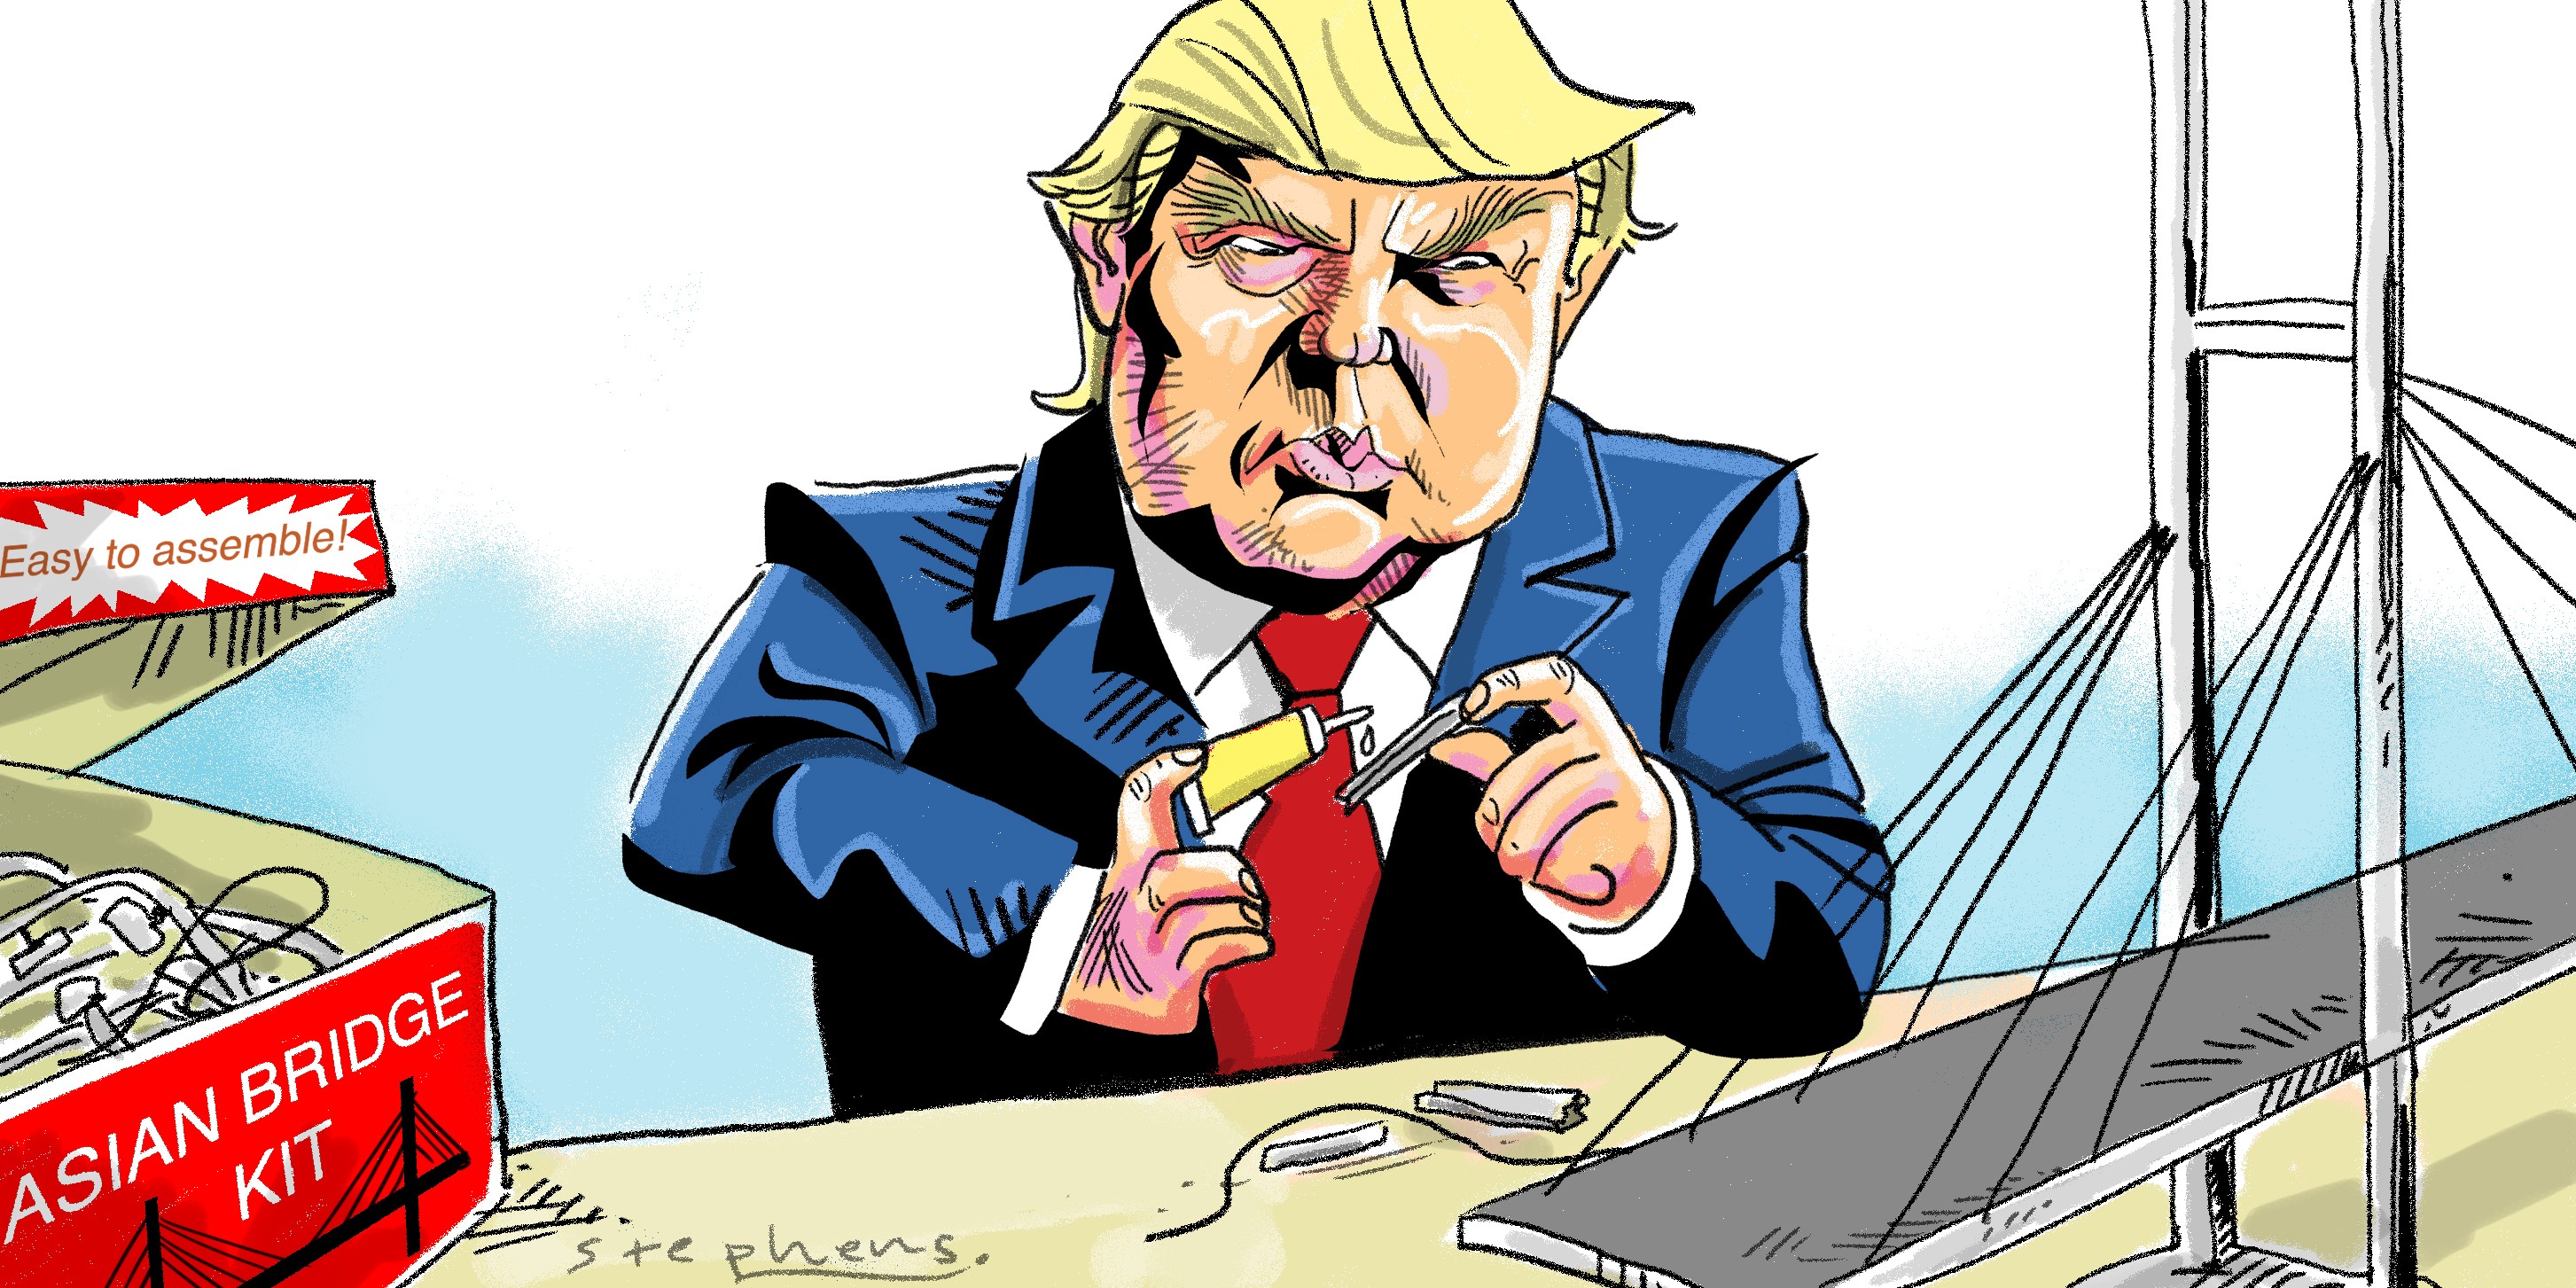 While the Trump administration has yet to “brand” its Asia policy, thus far we see prioritisation for a continued strong and influential American role in Asia. Illustration: Craig Stephens